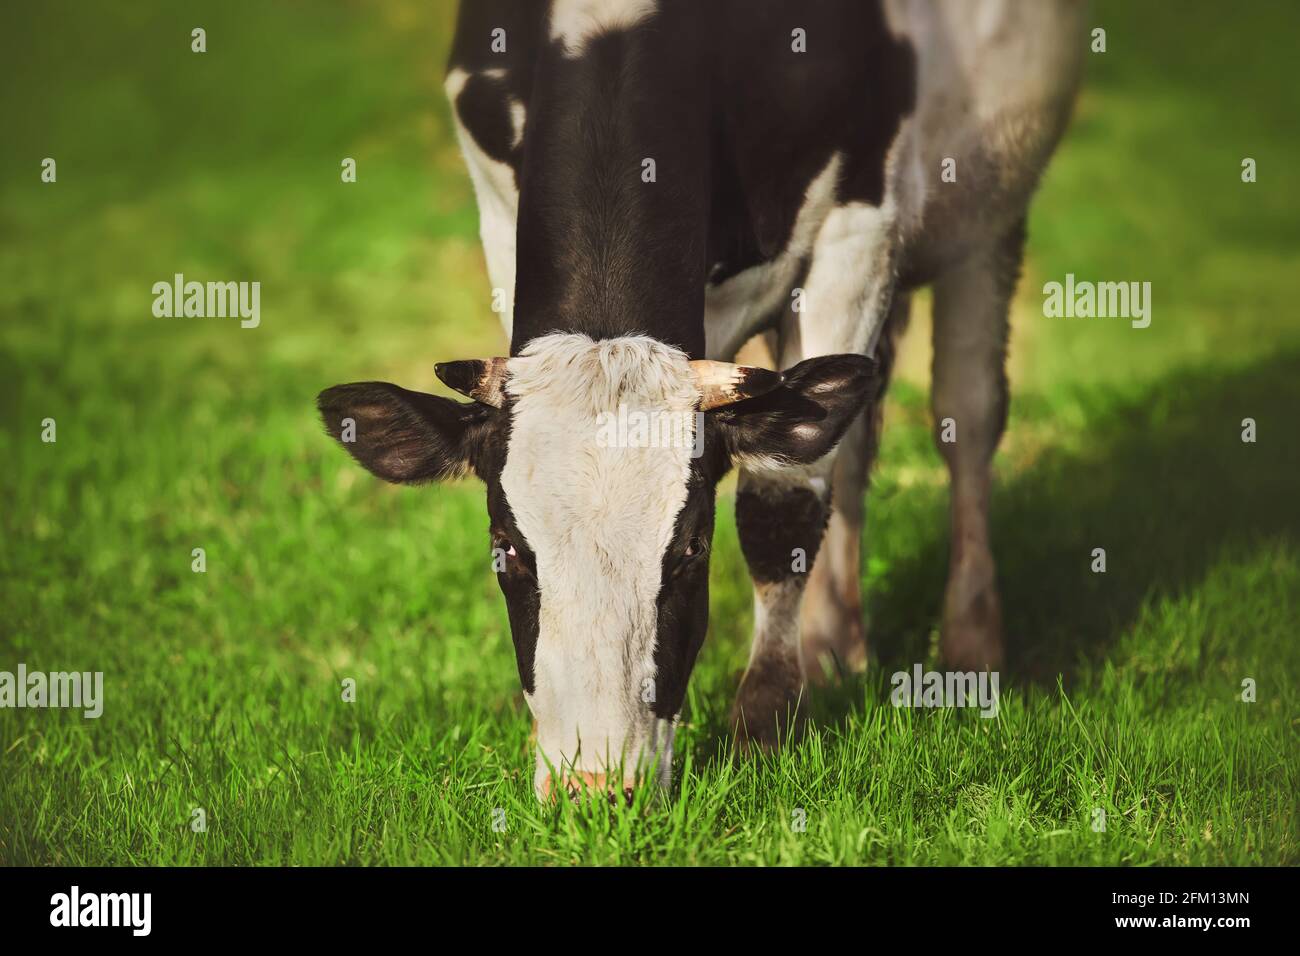 A cute black and white spotted cow stands in a meadow and eats green grass on a sunny summer day. Livestock. Nature. Stock Photo